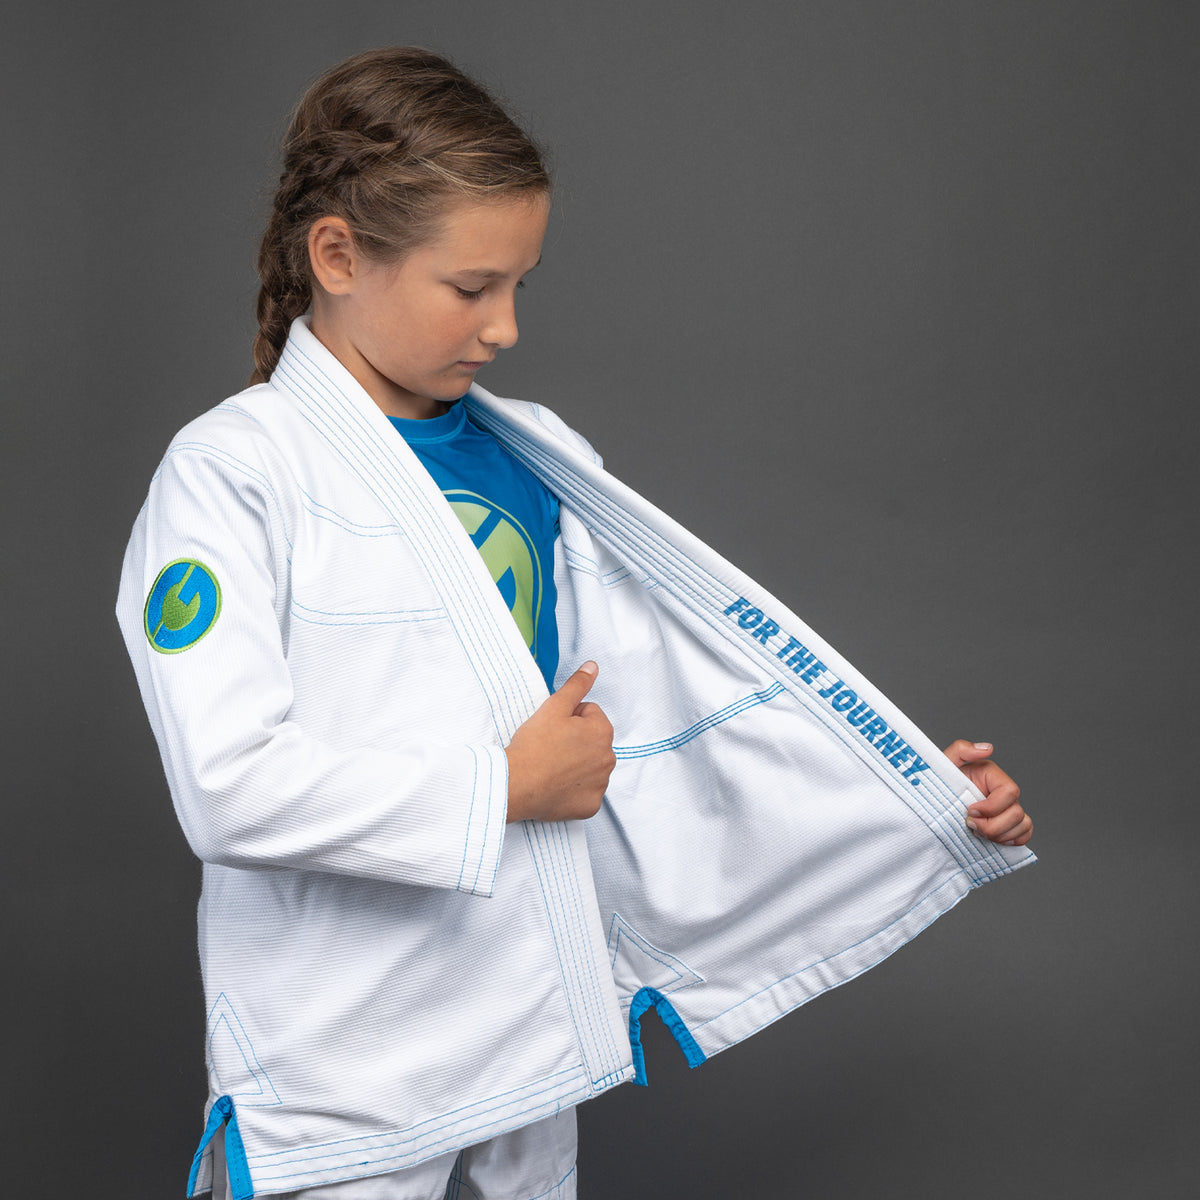 Is this gi in regulation? : r/bjj